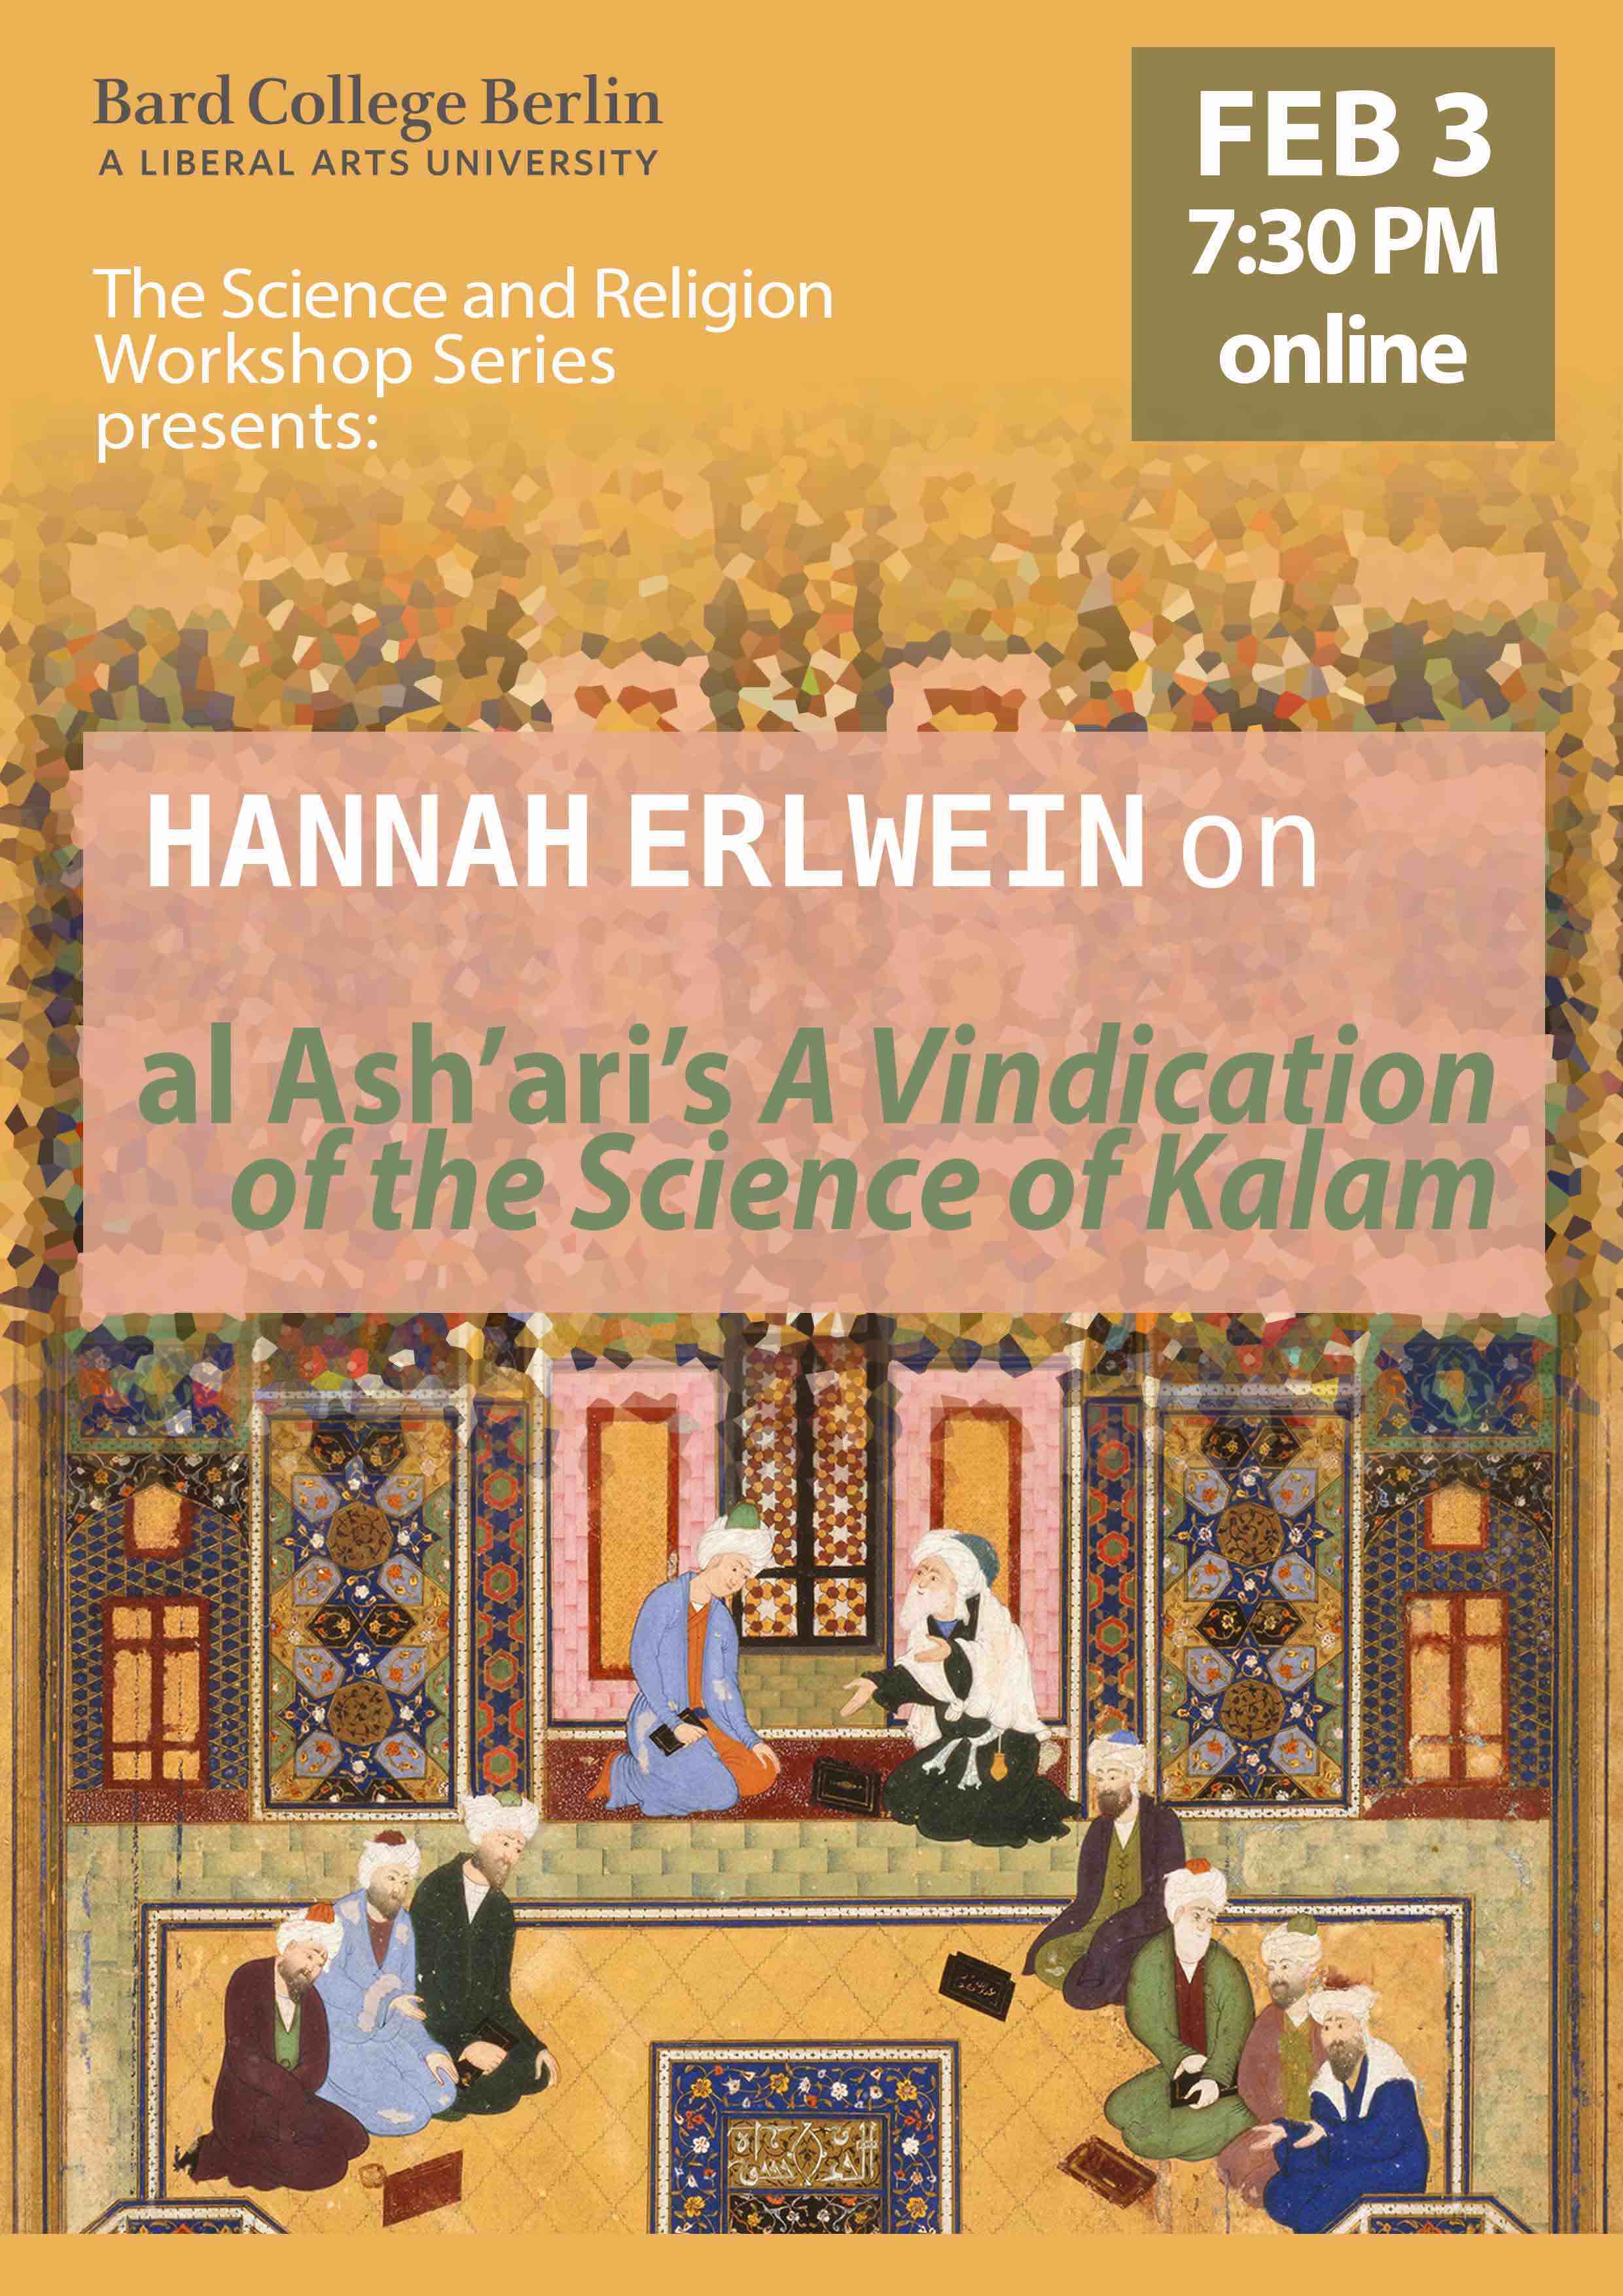 Hannah Erlwein&nbsp;on al-Ash&rsquo;ari&rsquo;s&nbsp;A Vindication of the Science of Kalam